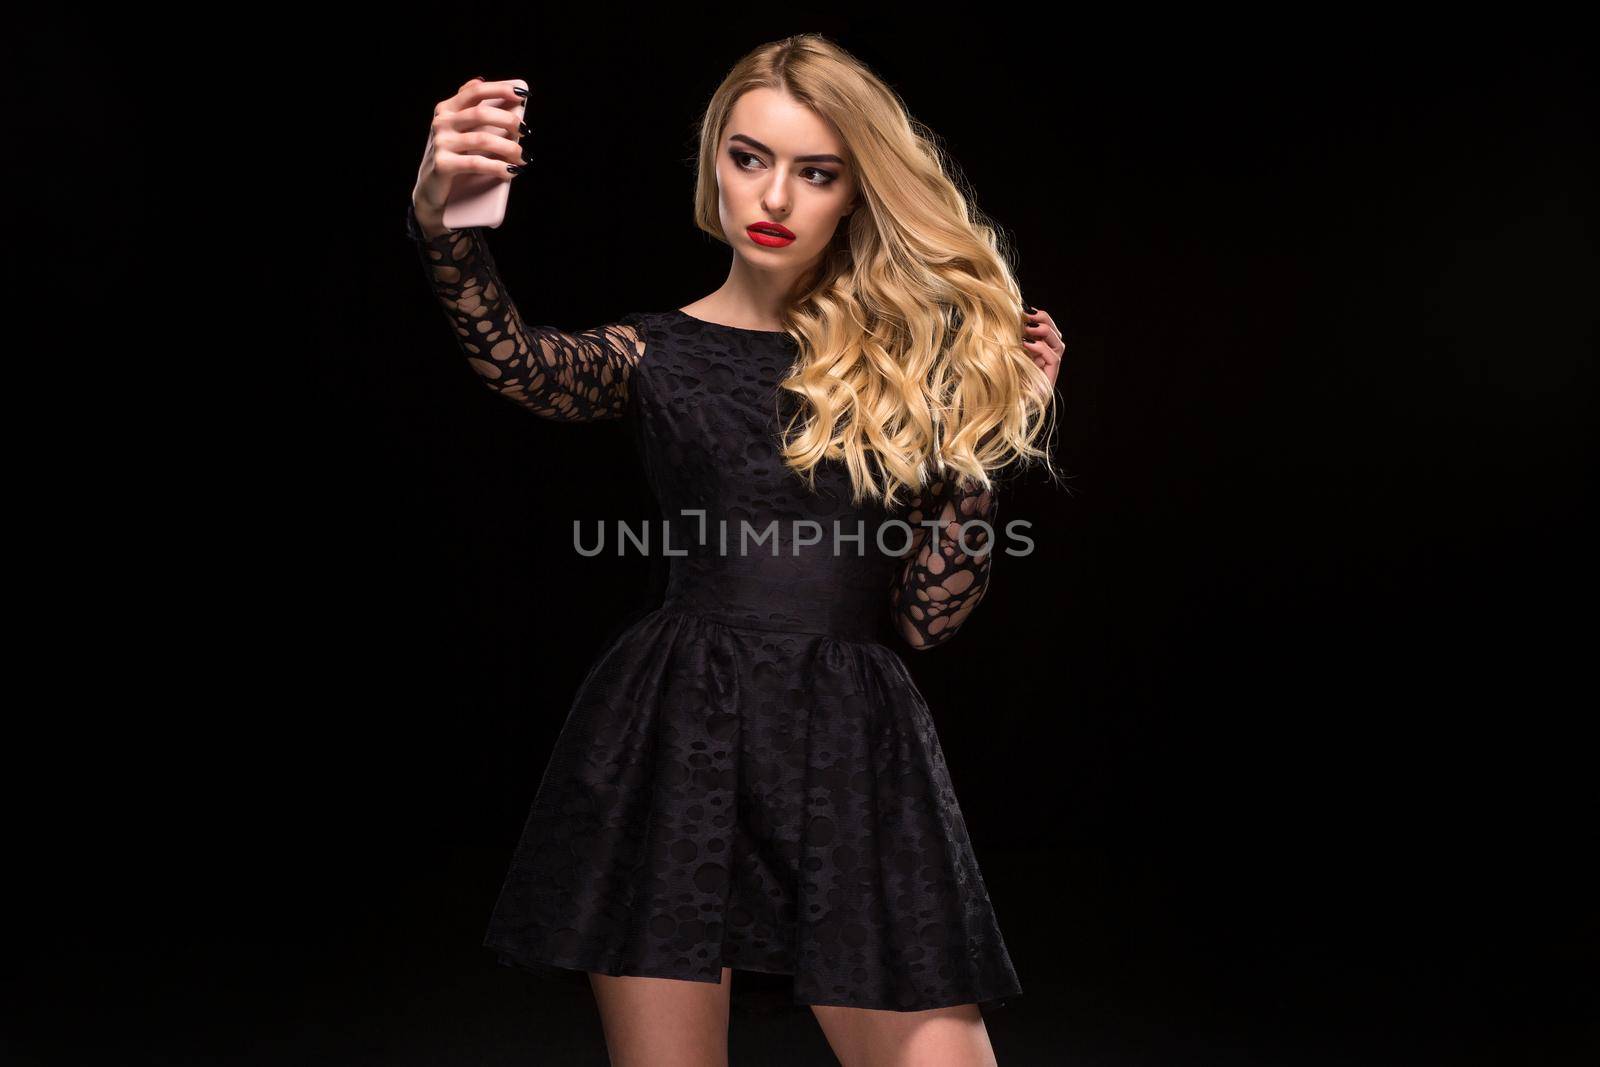 Beautiful blonde woman in black dress and make up taking selfie with mobile phone isolated on the black background. Female beauty model with curly hair.